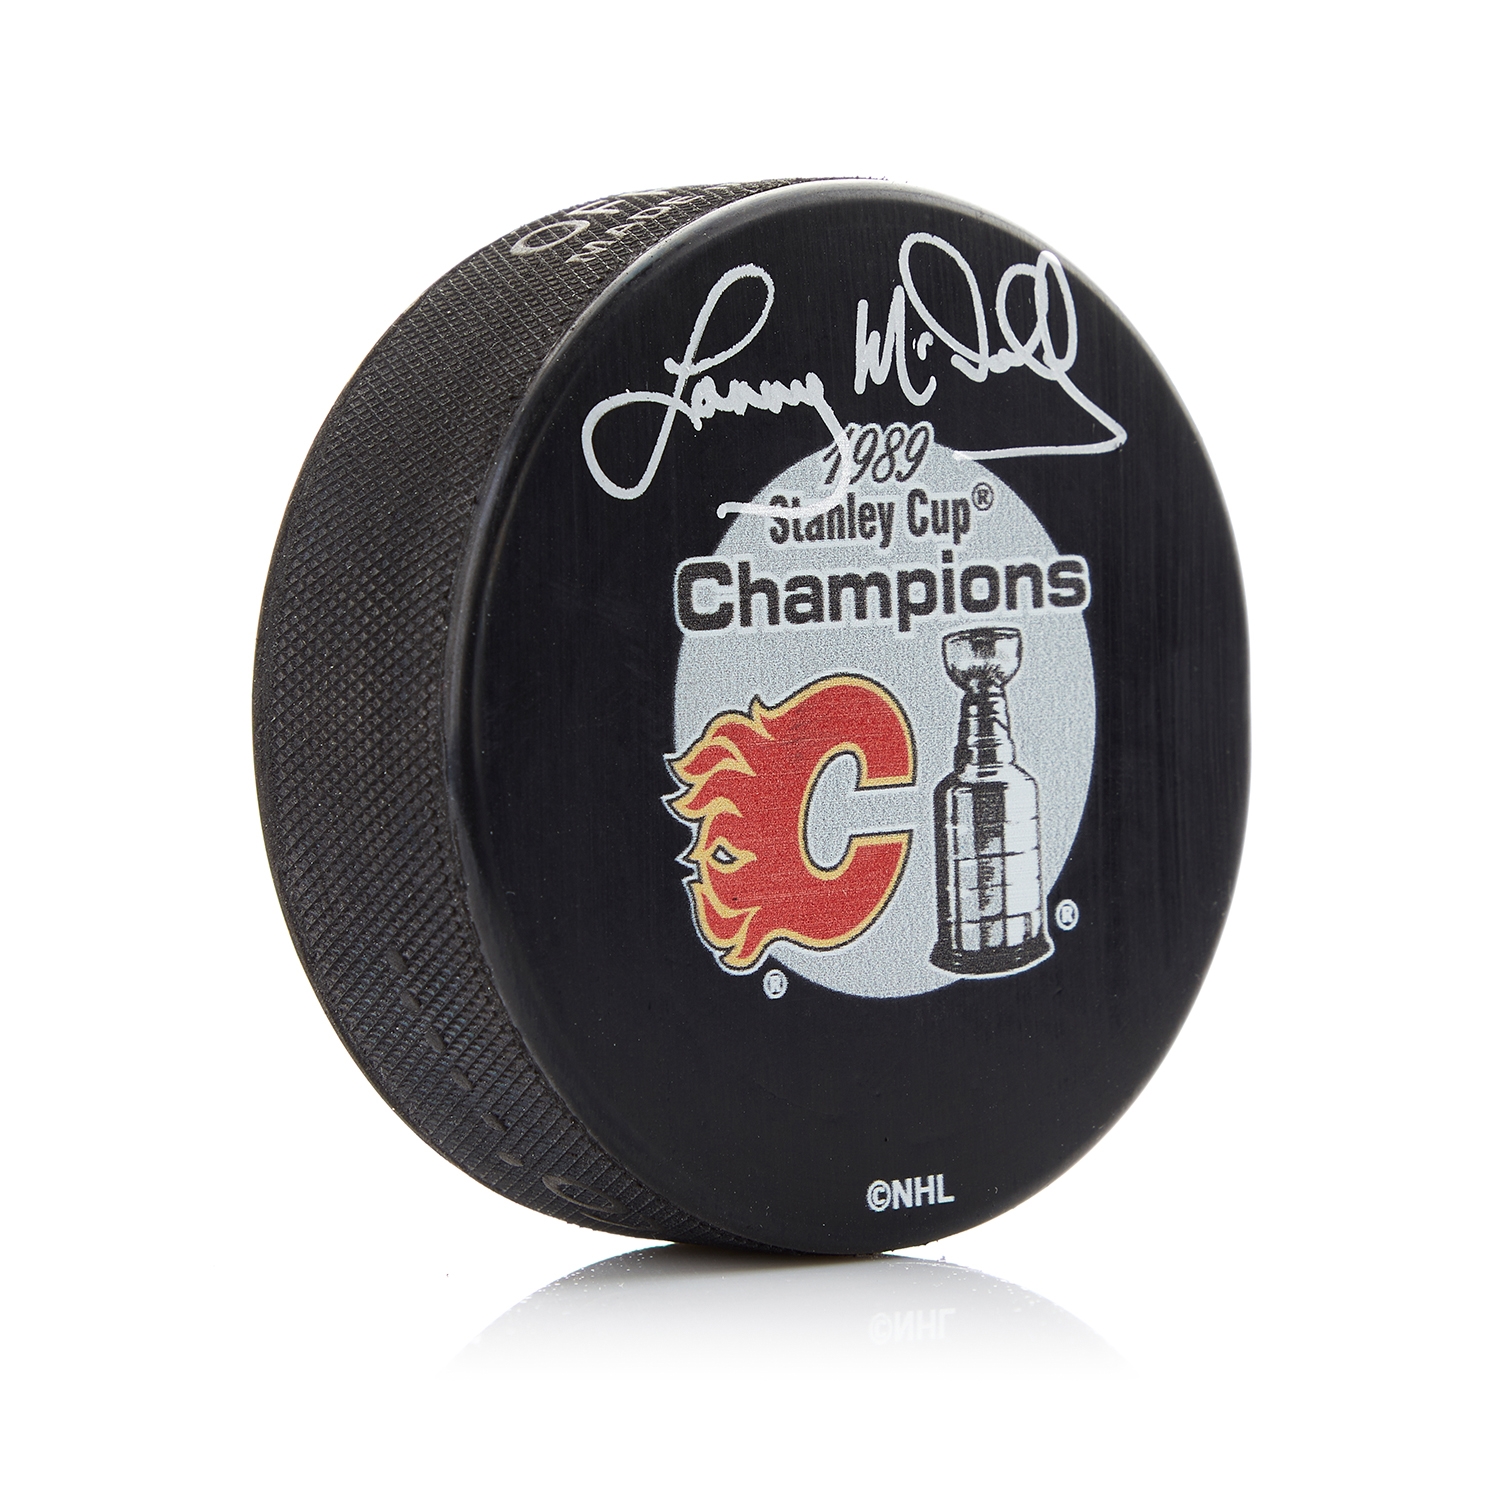 Lanny McDonald Signed 1989 Calgary Flames Stanley Cup Champion Puck